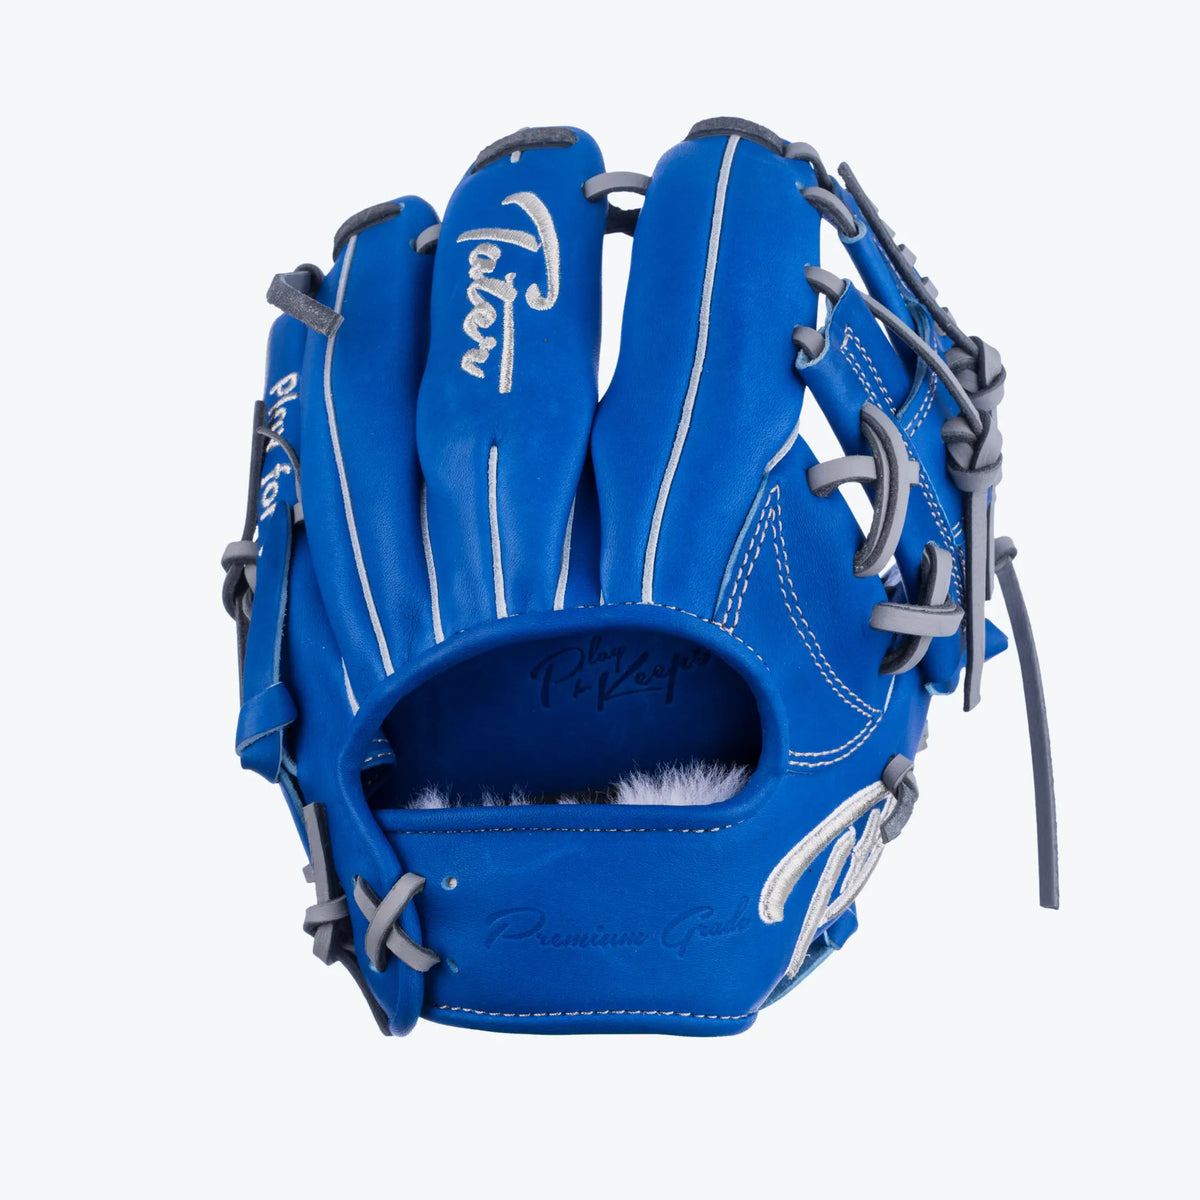 Professional blue premium infield training glove, 9.5-inch, with grey lacing and &#39;Play to Keeps&#39; inscription, designed for high-level performance by Tater Baseball.